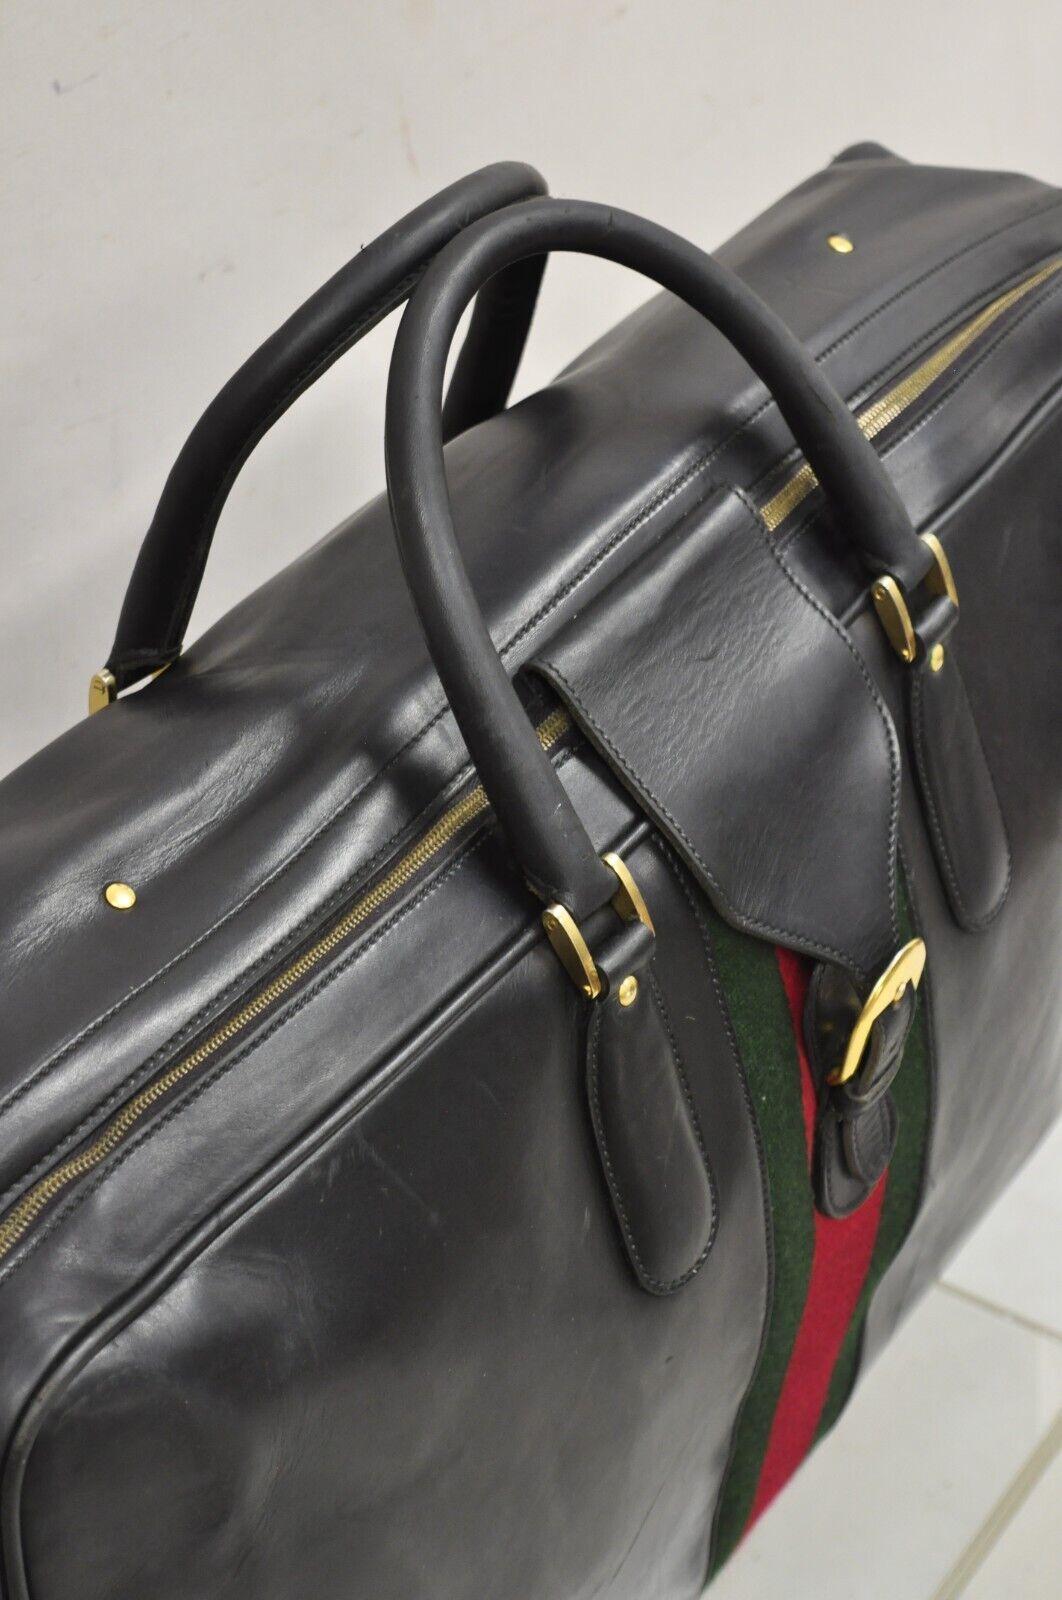 Vintage Gucci Large Black Leather Suitcase Luggage Travel Bag Green Red Webbing For Sale 9